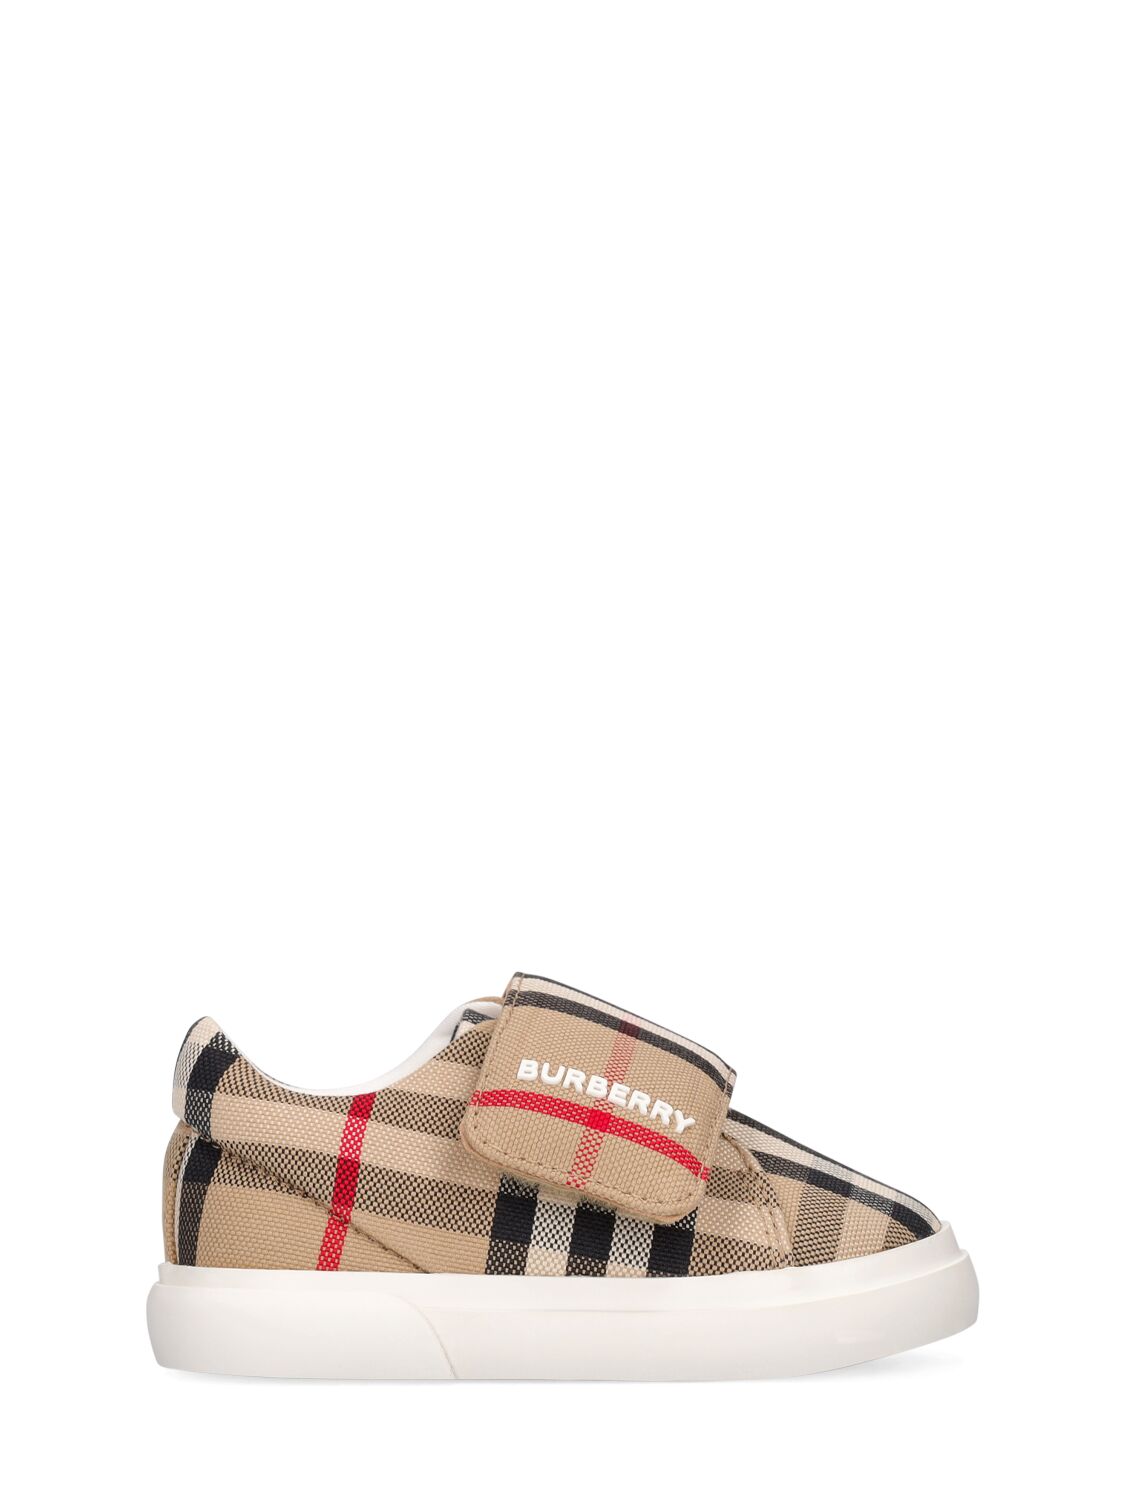 Image of Check Print Cotton Strap Sneakers